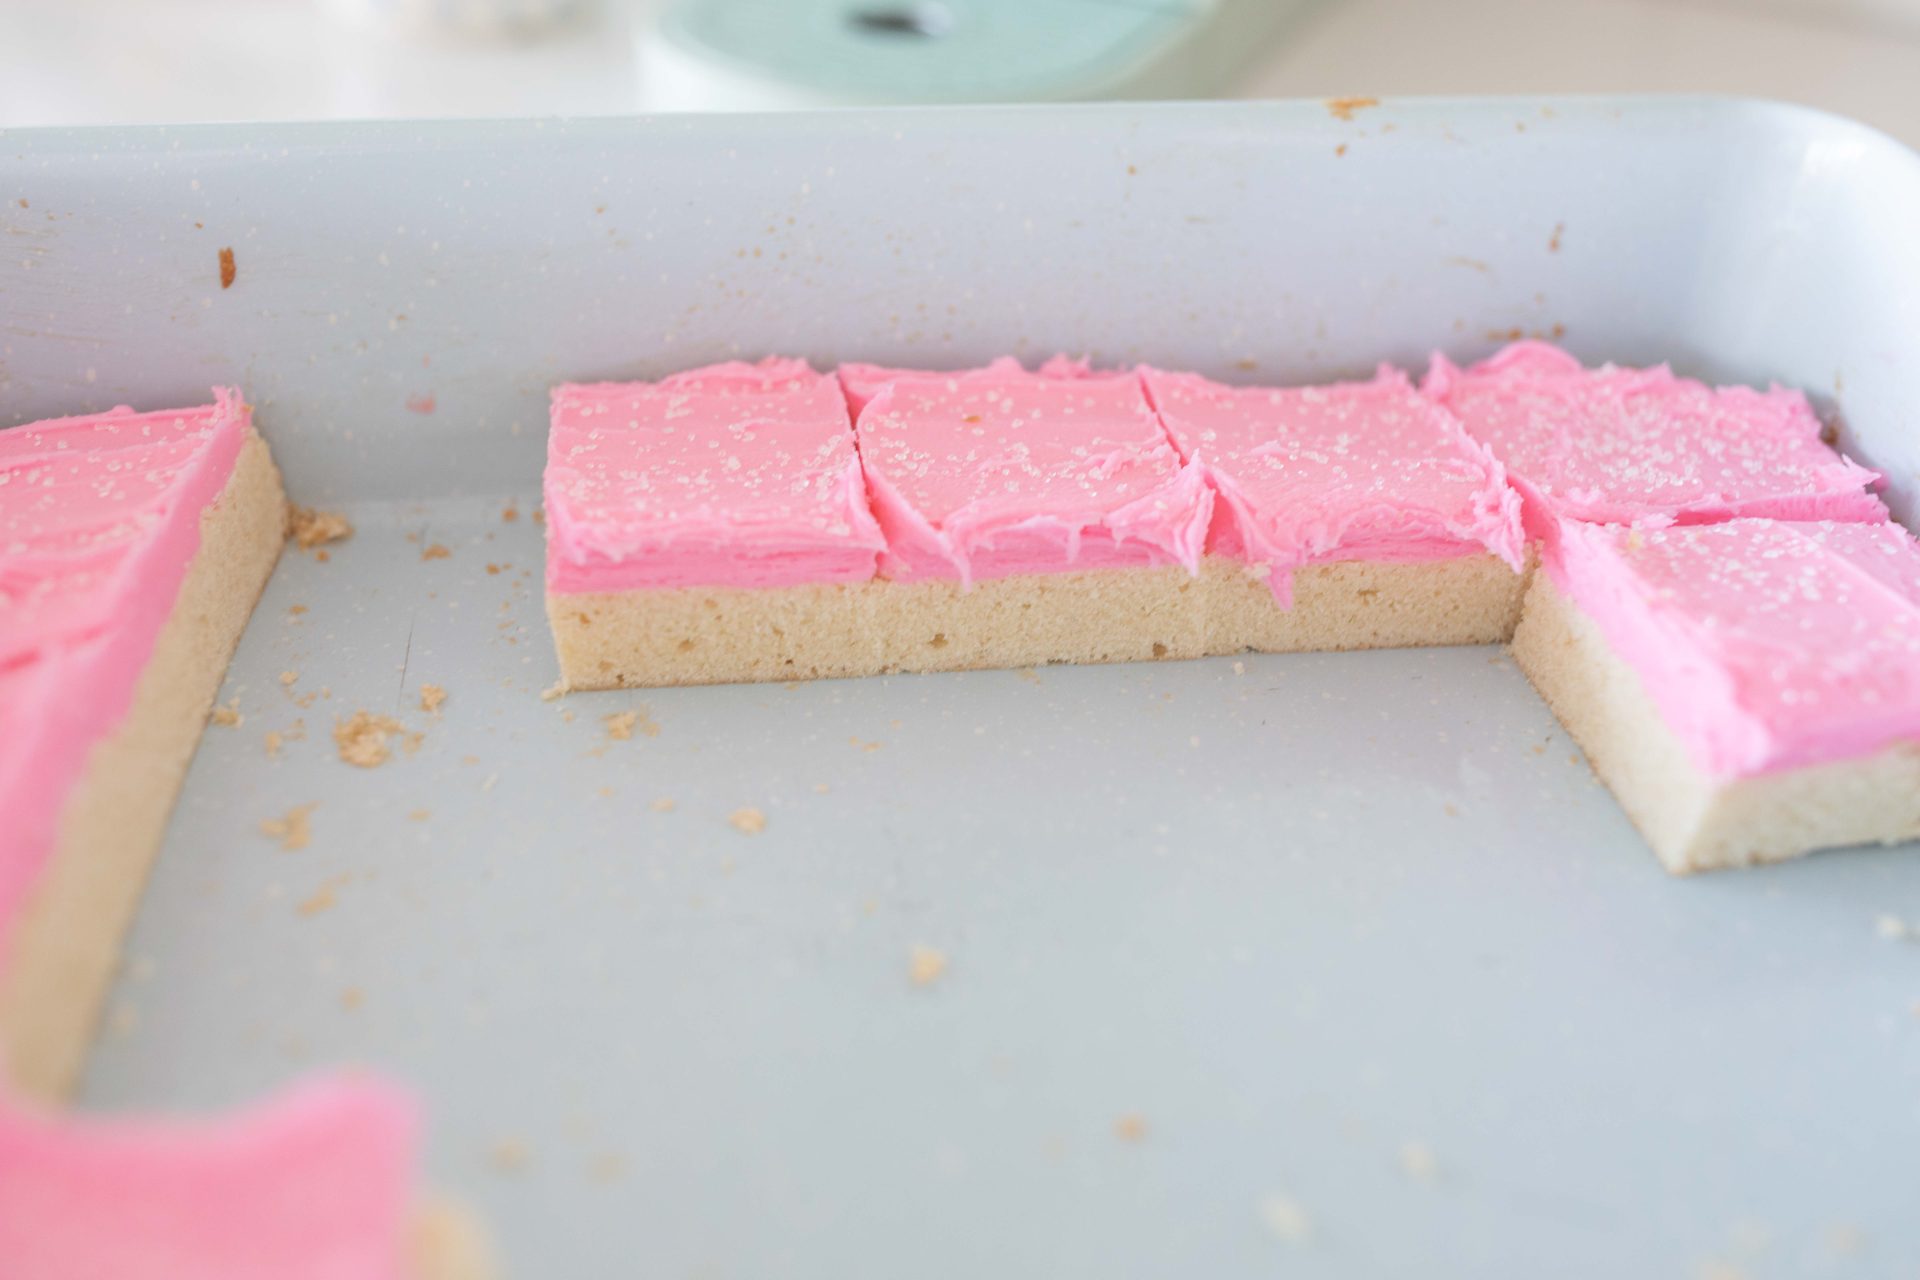 frosted sugar cookie bars, sugar cookies, pink frosting, pink frosted sugar cookies, almond sugar cookies, almond extract, holiday, baking, pretty food, pink valentines day bars, spring sugar cookie bars, delicious recipe, the best sugar cookie bars, how to make sugar cookie bars, dessert, valentines day treats, easter, spring, pretty food, simply taralynn recipes, baking